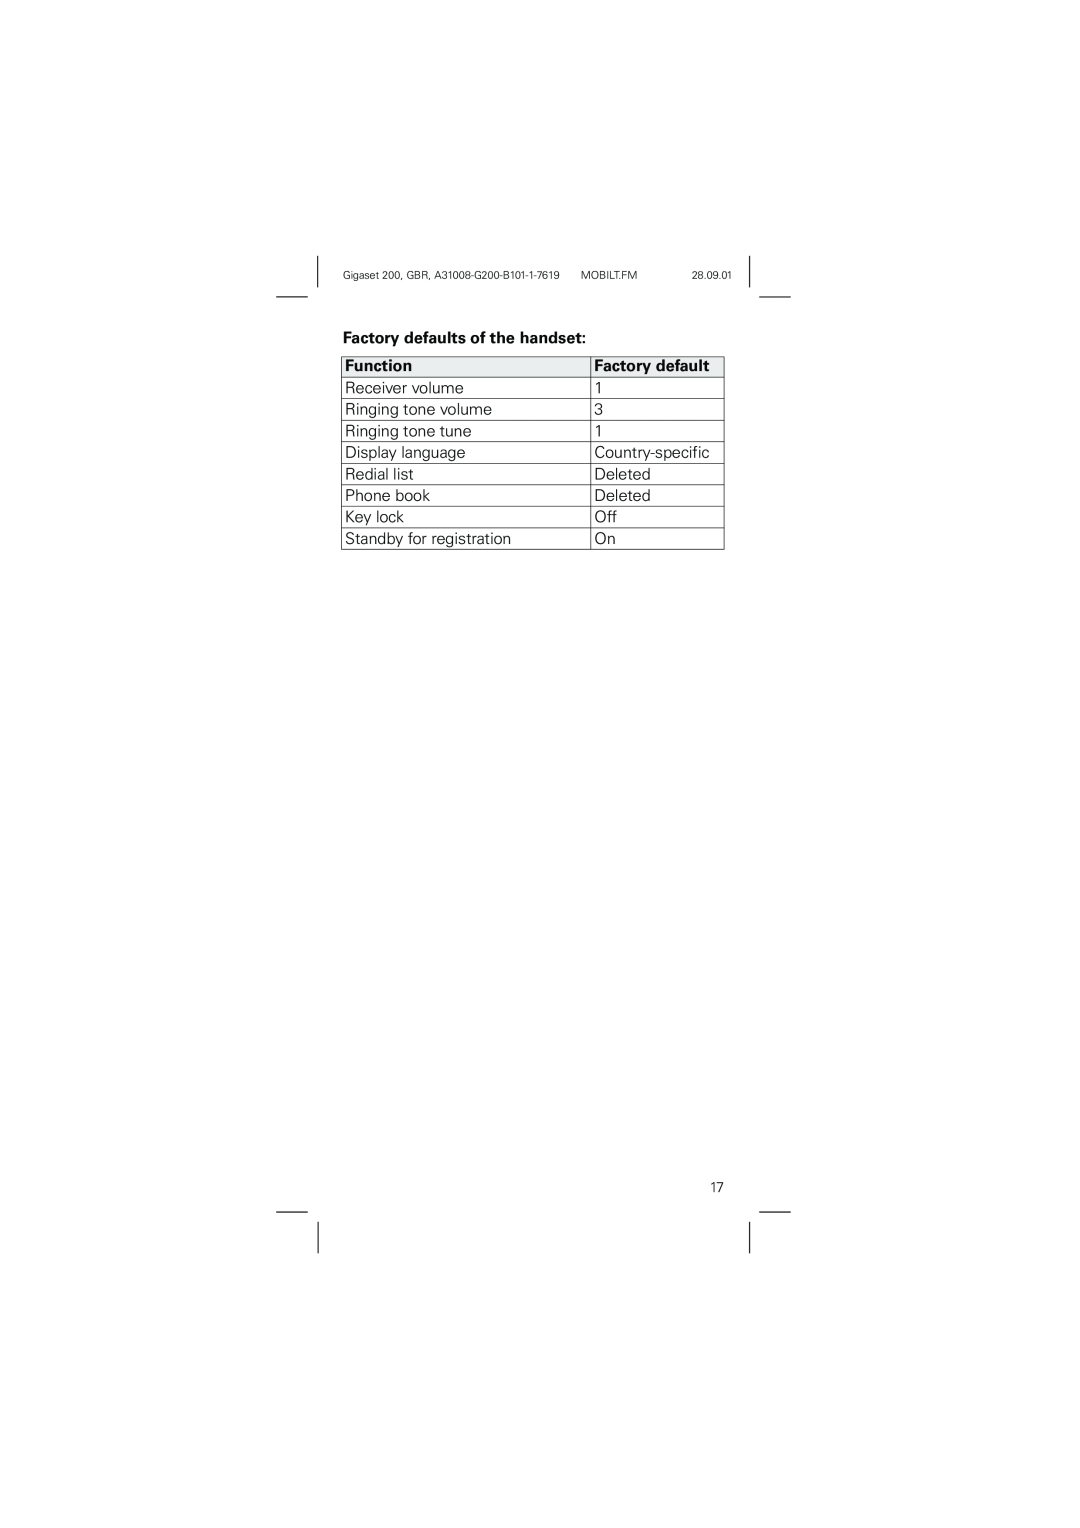 Siemens 200 manual Factory defaults of the handset, Function 